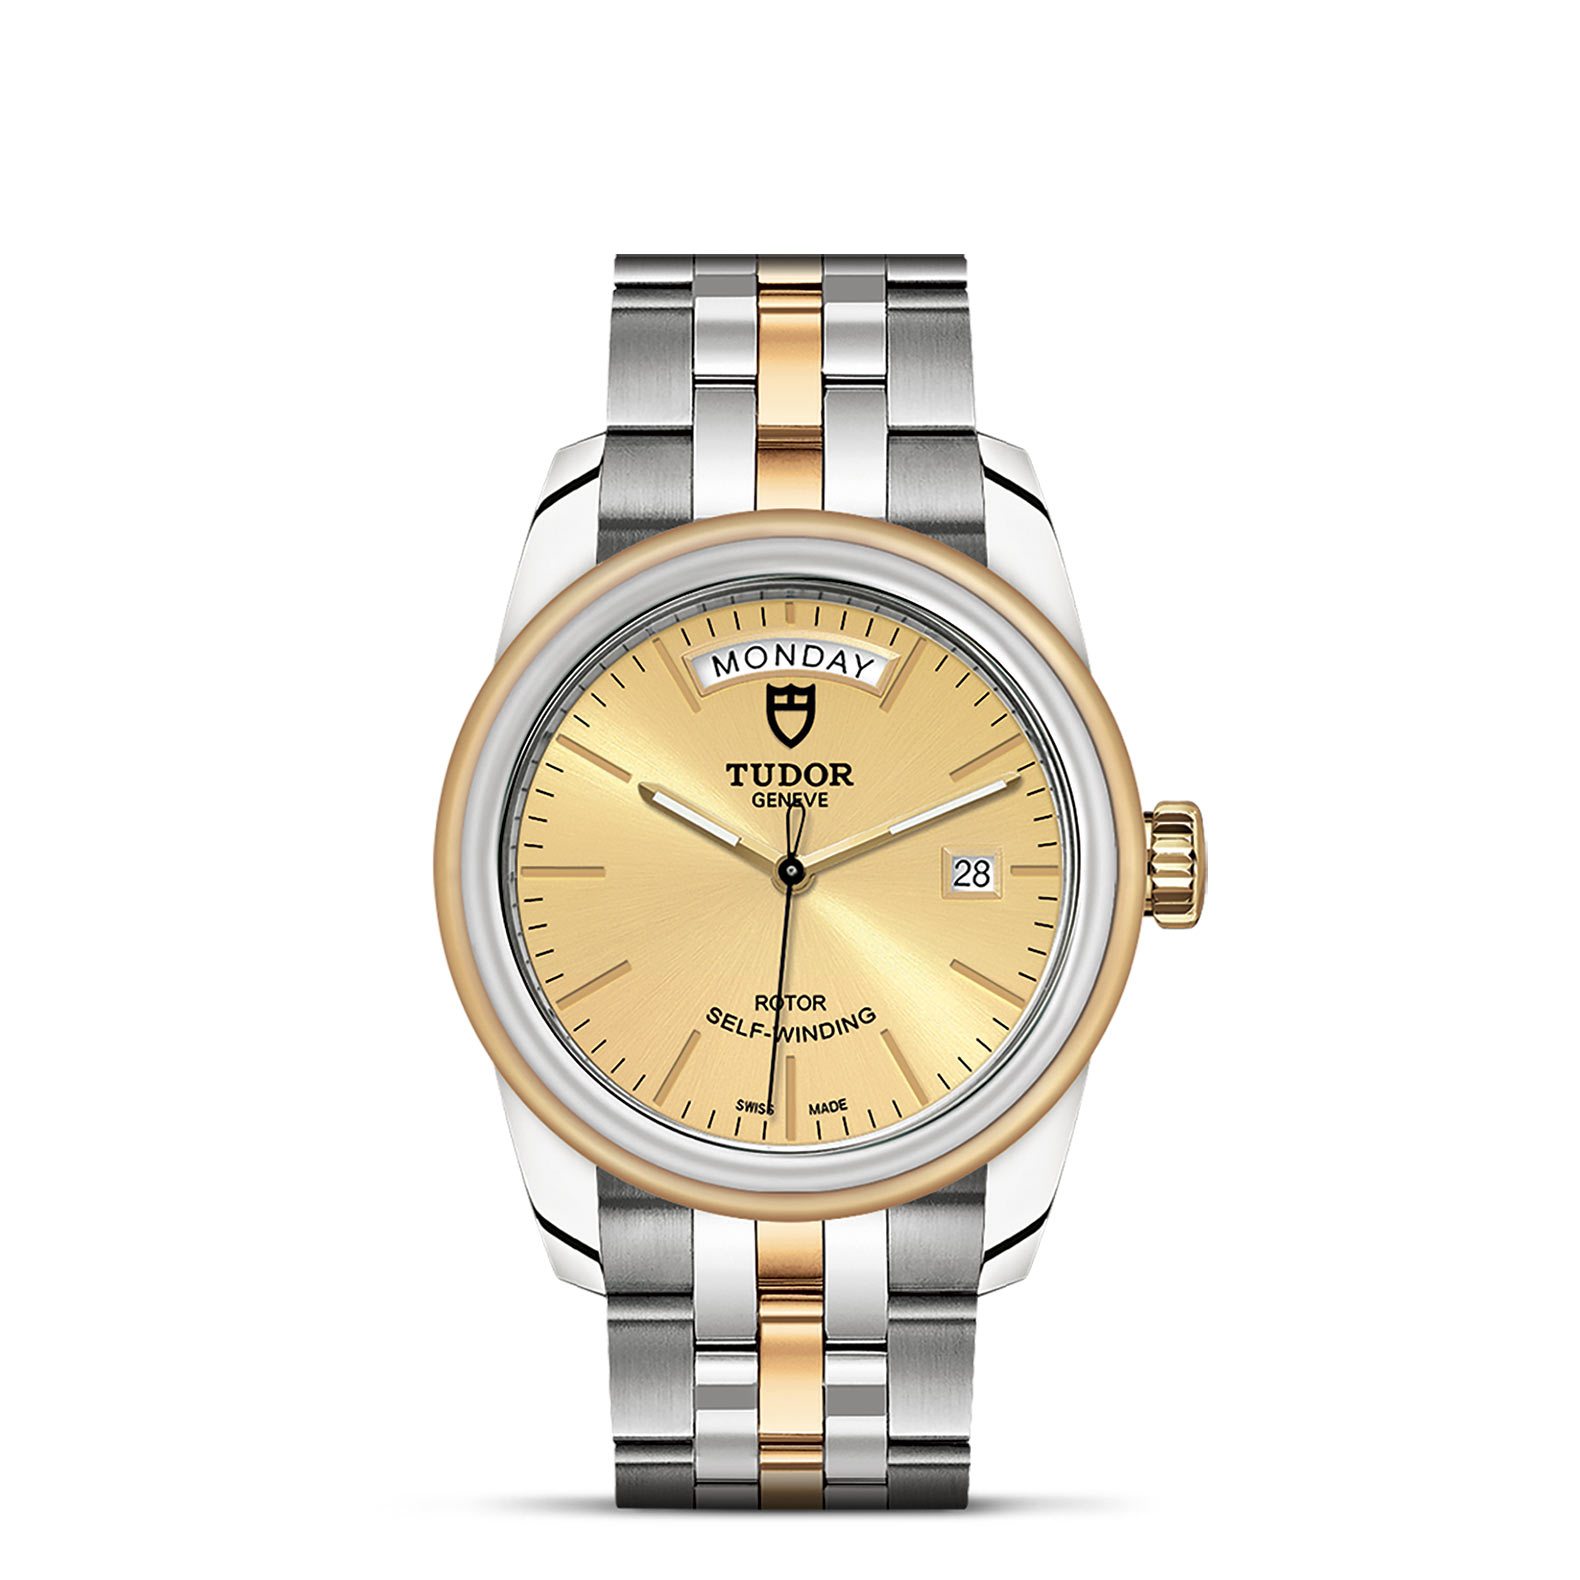 TUDOR Glamour Date+Day - M56003-0005